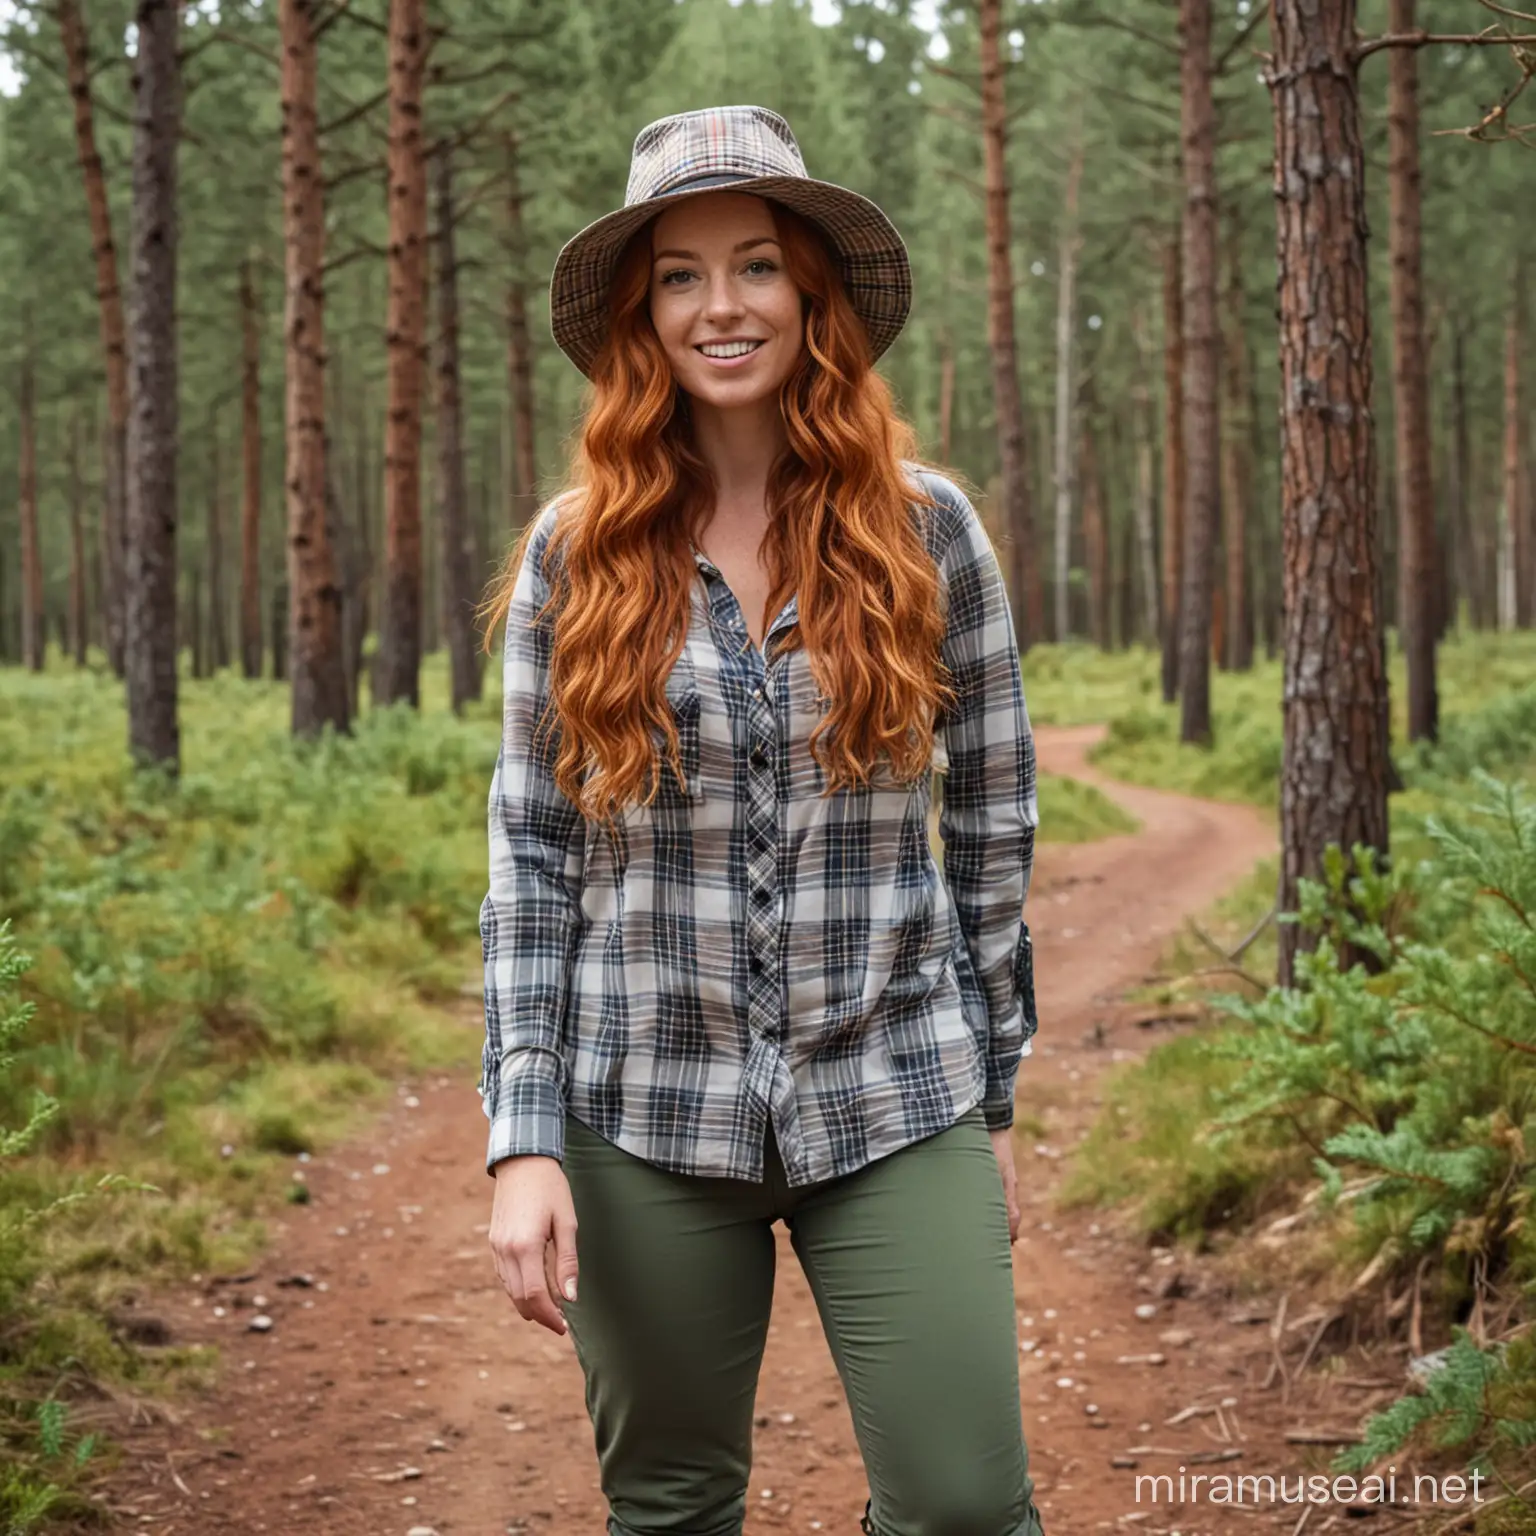 Irish Woman Hiker with Curly Red Hair in Pine Forest